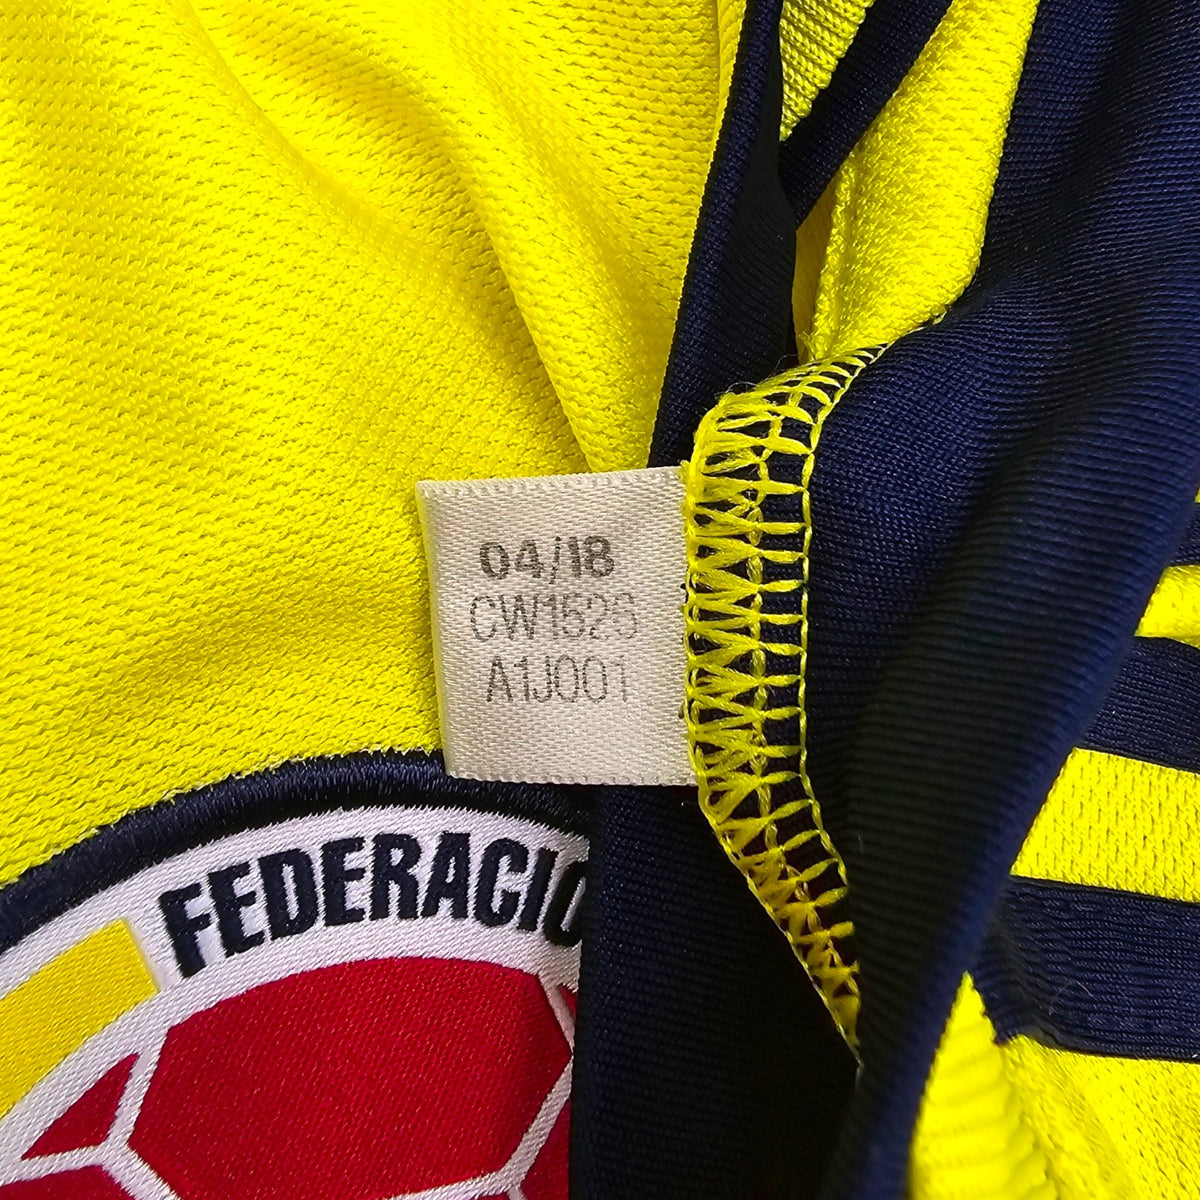 2018/19 Colombia Home Football Shirt (L) Adidas - Football Finery - FF204023